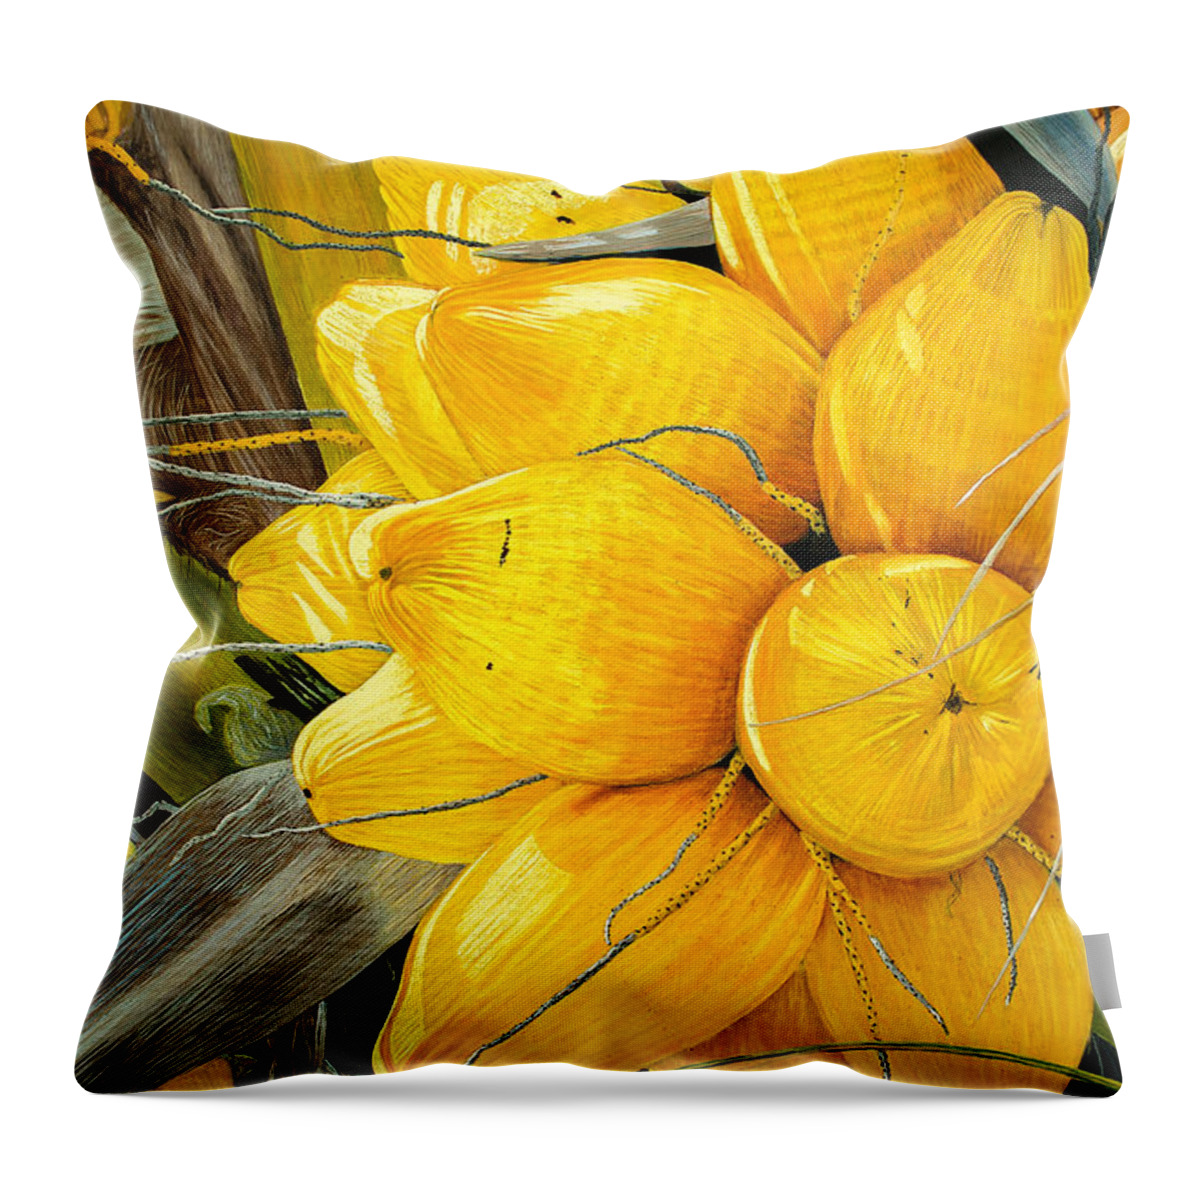 Coconut Throw Pillow featuring the painting yellow Coconut Original Oil Painting 36x24x1 inch on canvas by Manuel Lopez